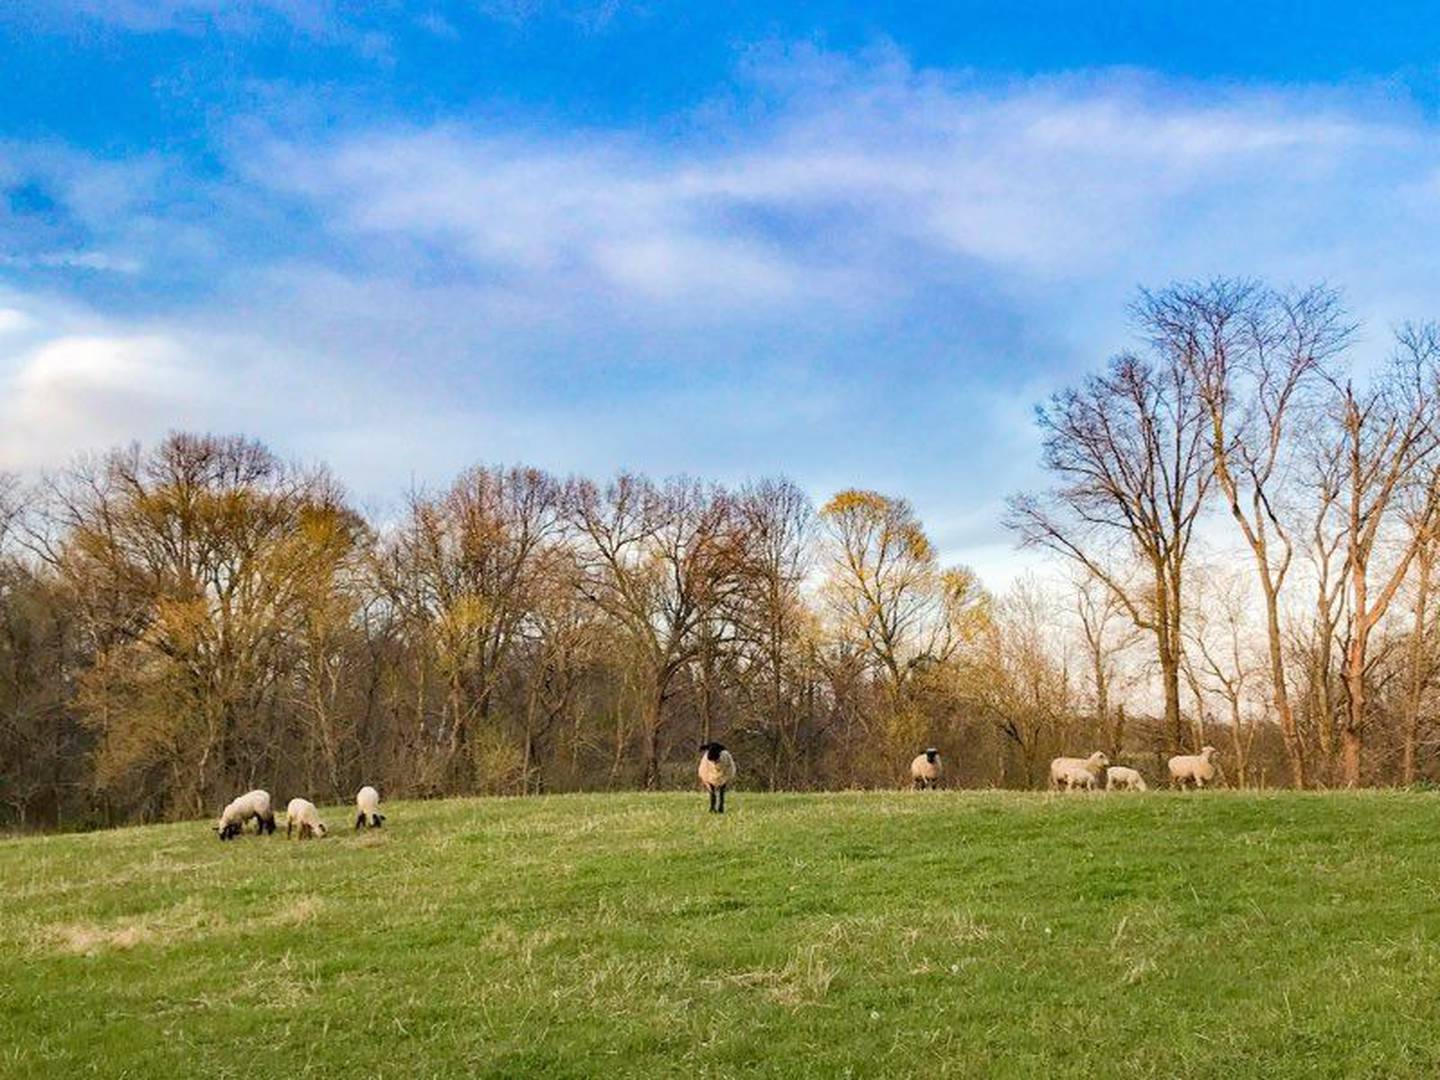 “Baby don’t herd me” — Kenzie Dillow: “Relaxation on the Illinois farm.”